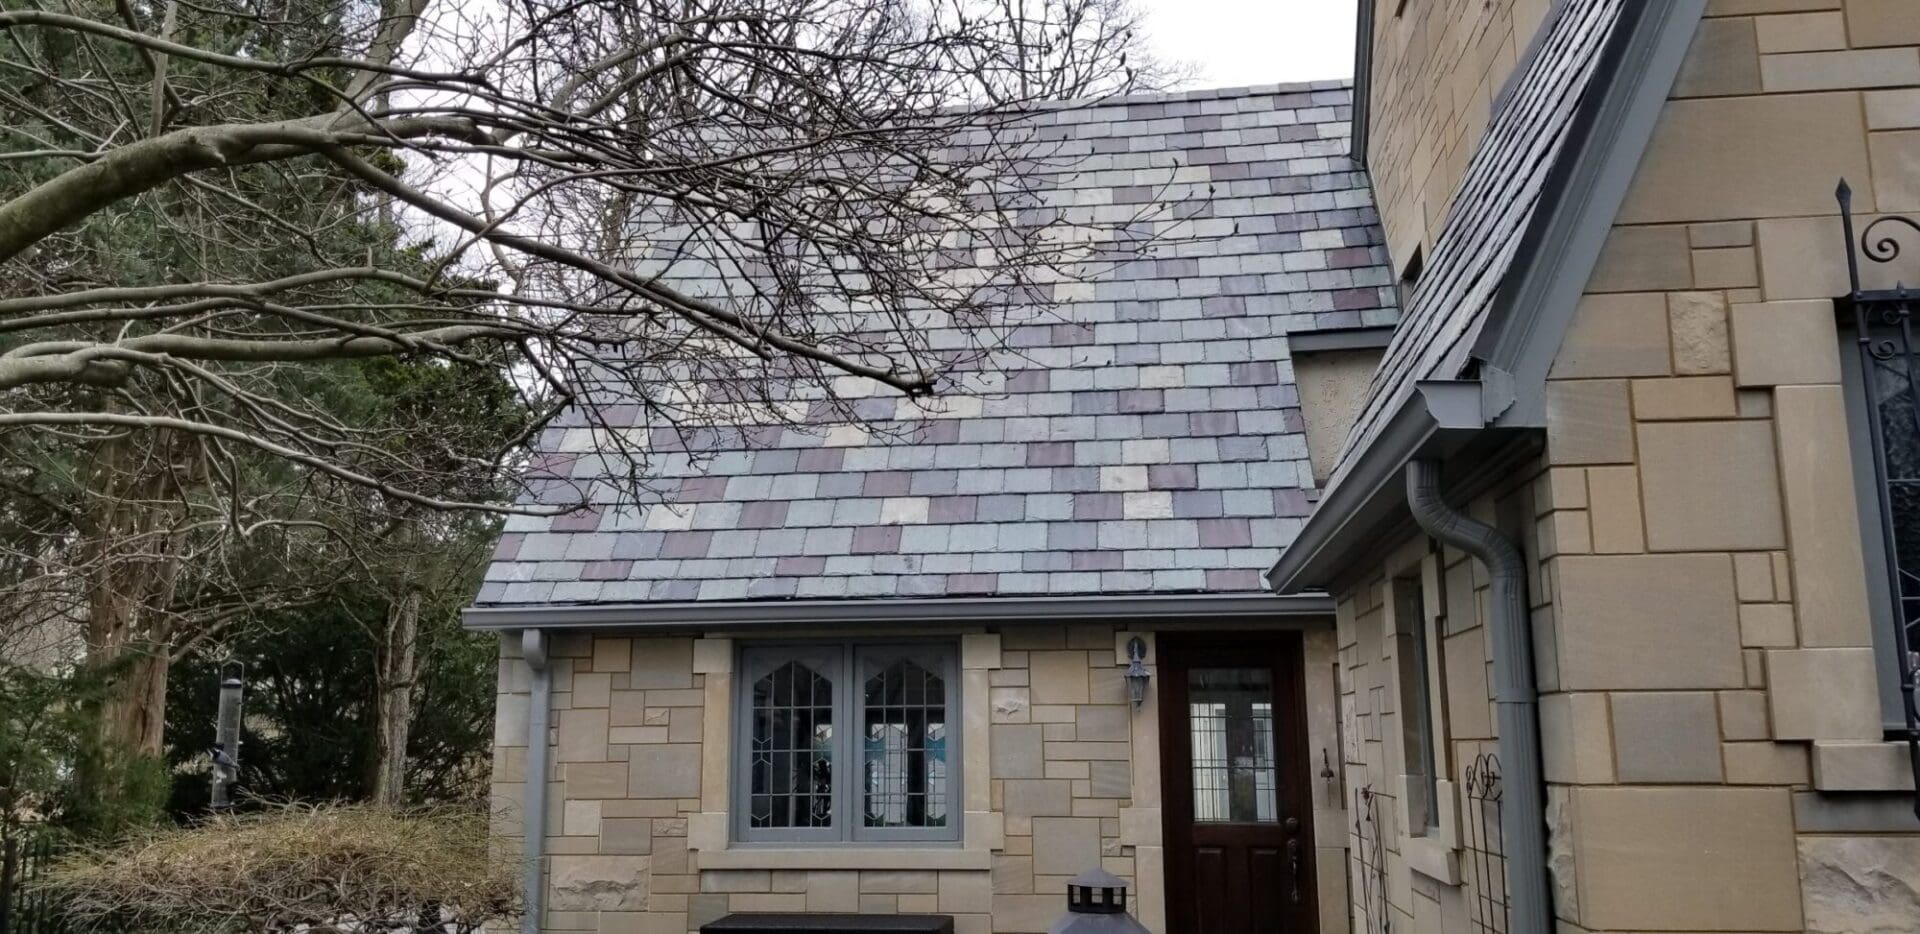 Slate Roof After